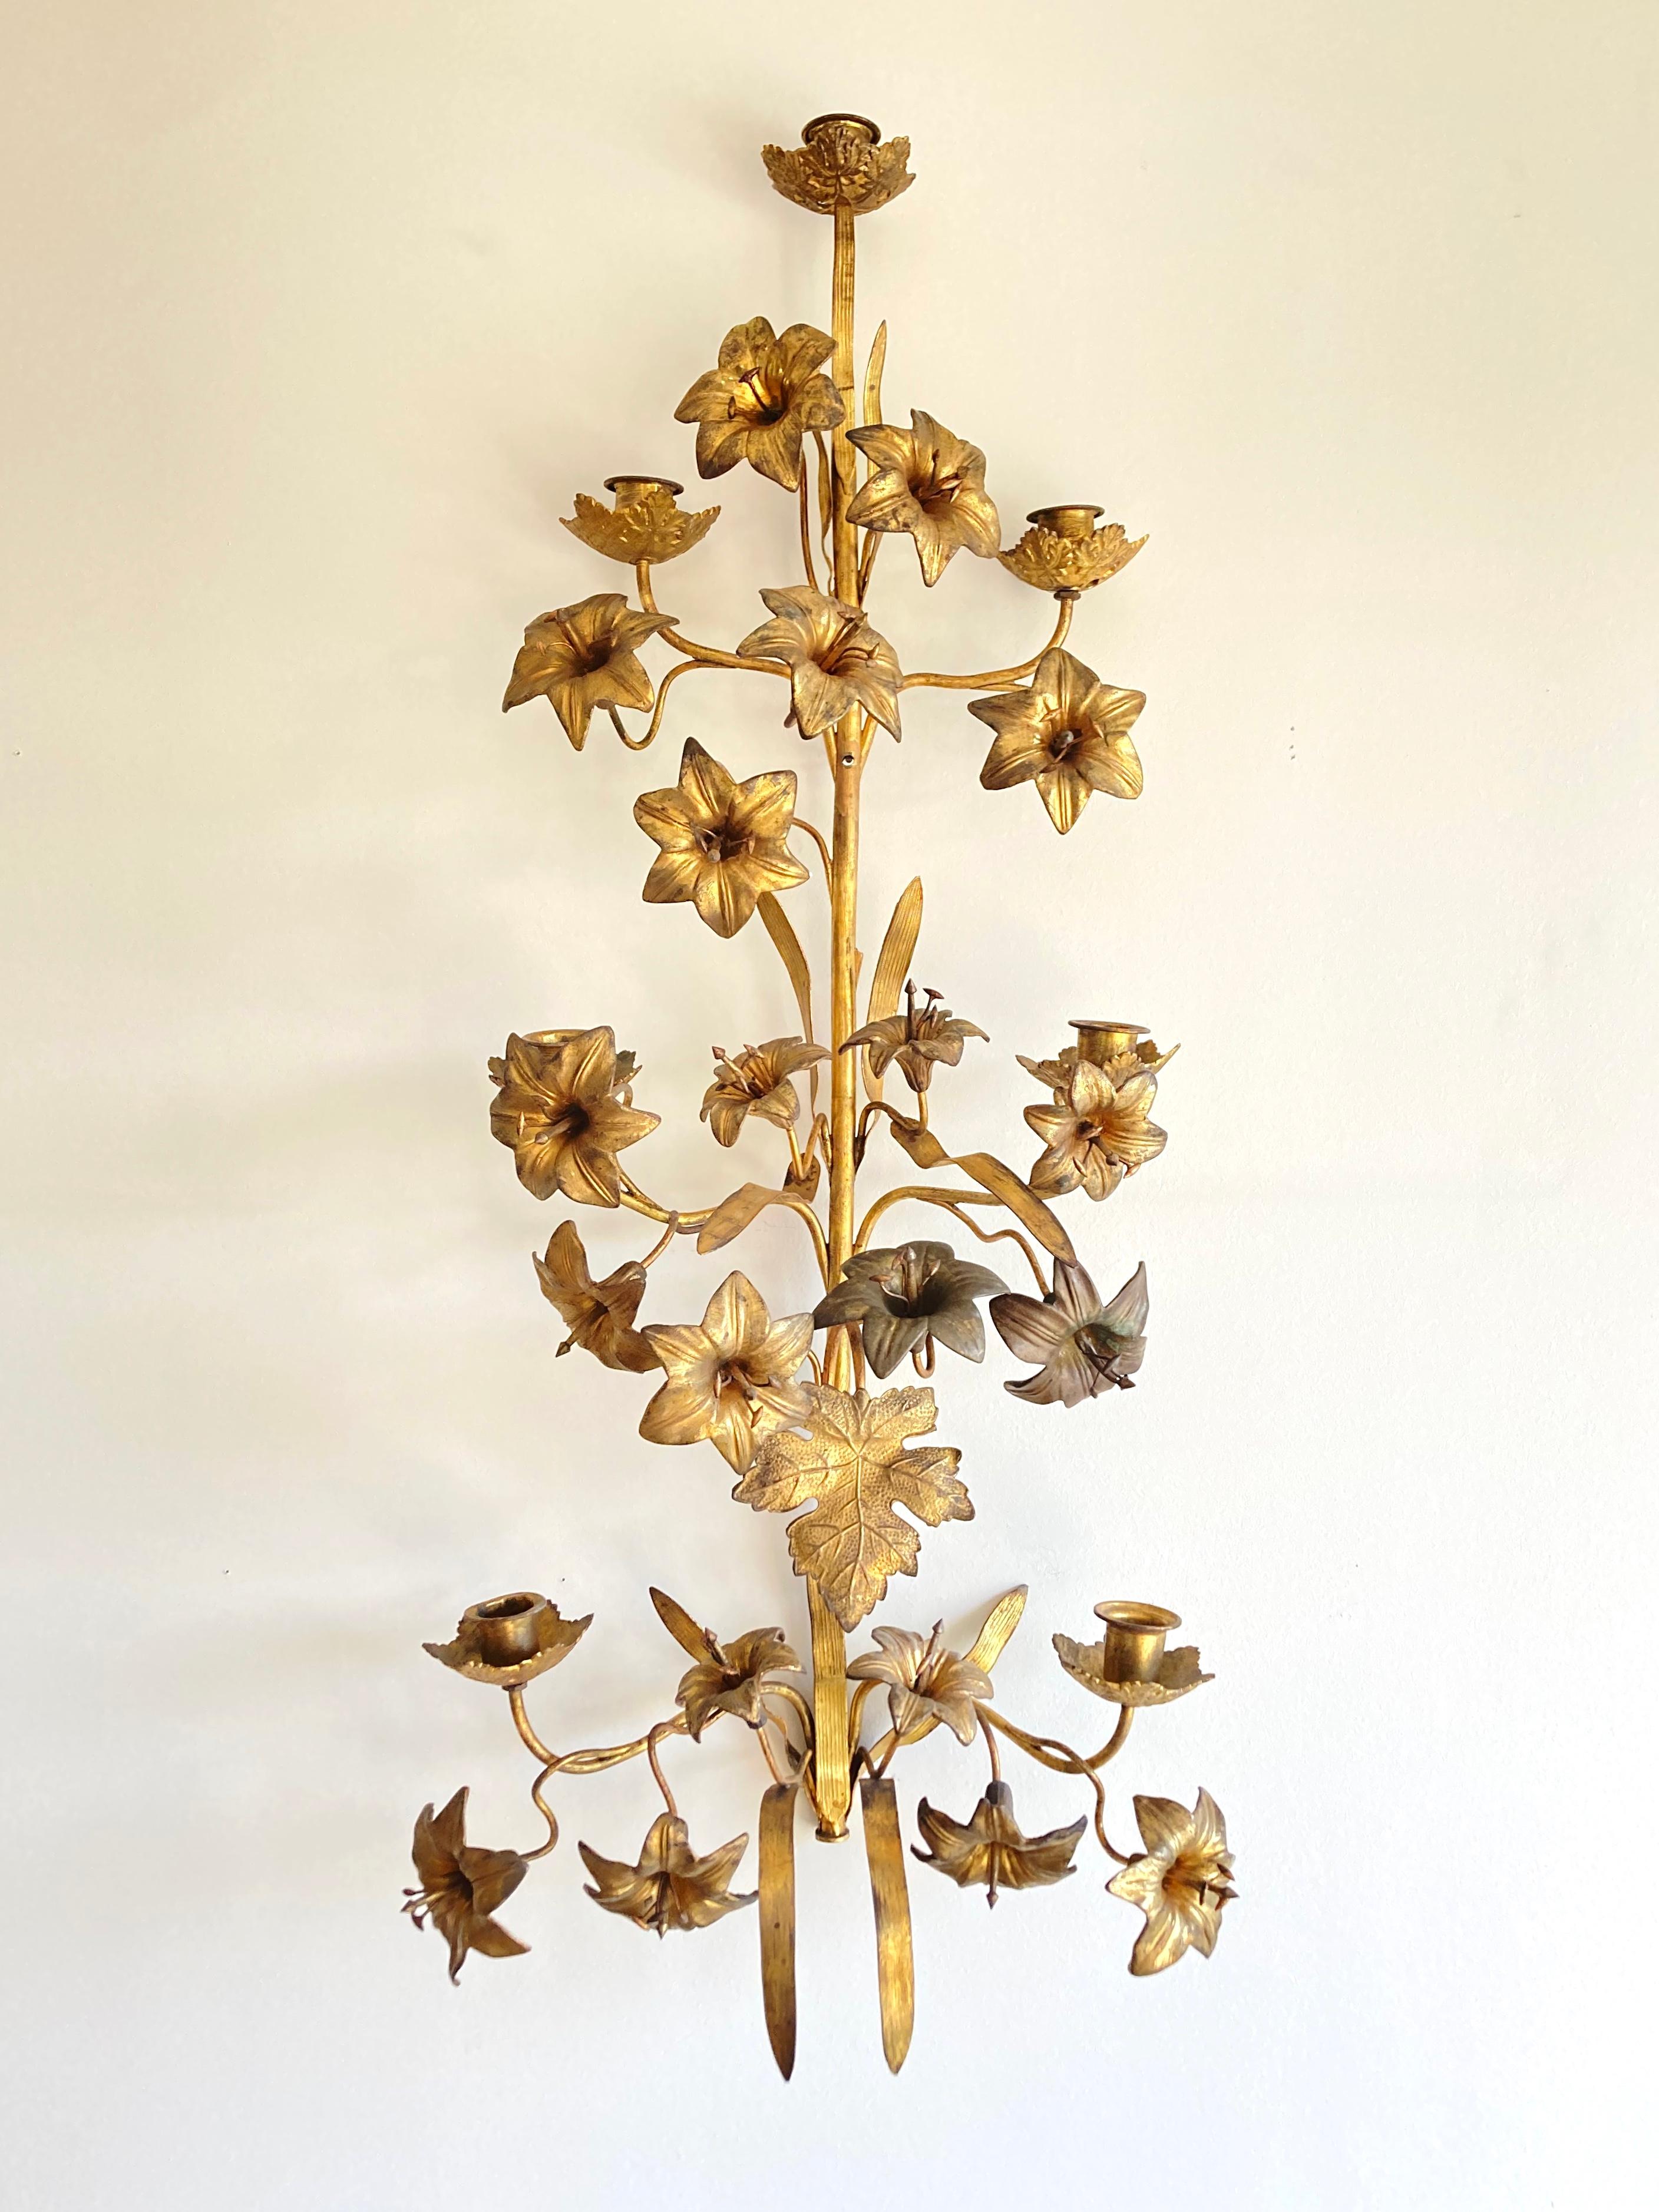 A very decorative, authentic French Napoleon III church wall sconce, also called harvest candelabra. This is an unusual, large wall sconce model made for 7 candles. Made of brass and gilded metal it dates from the late 19th century. It feature 20